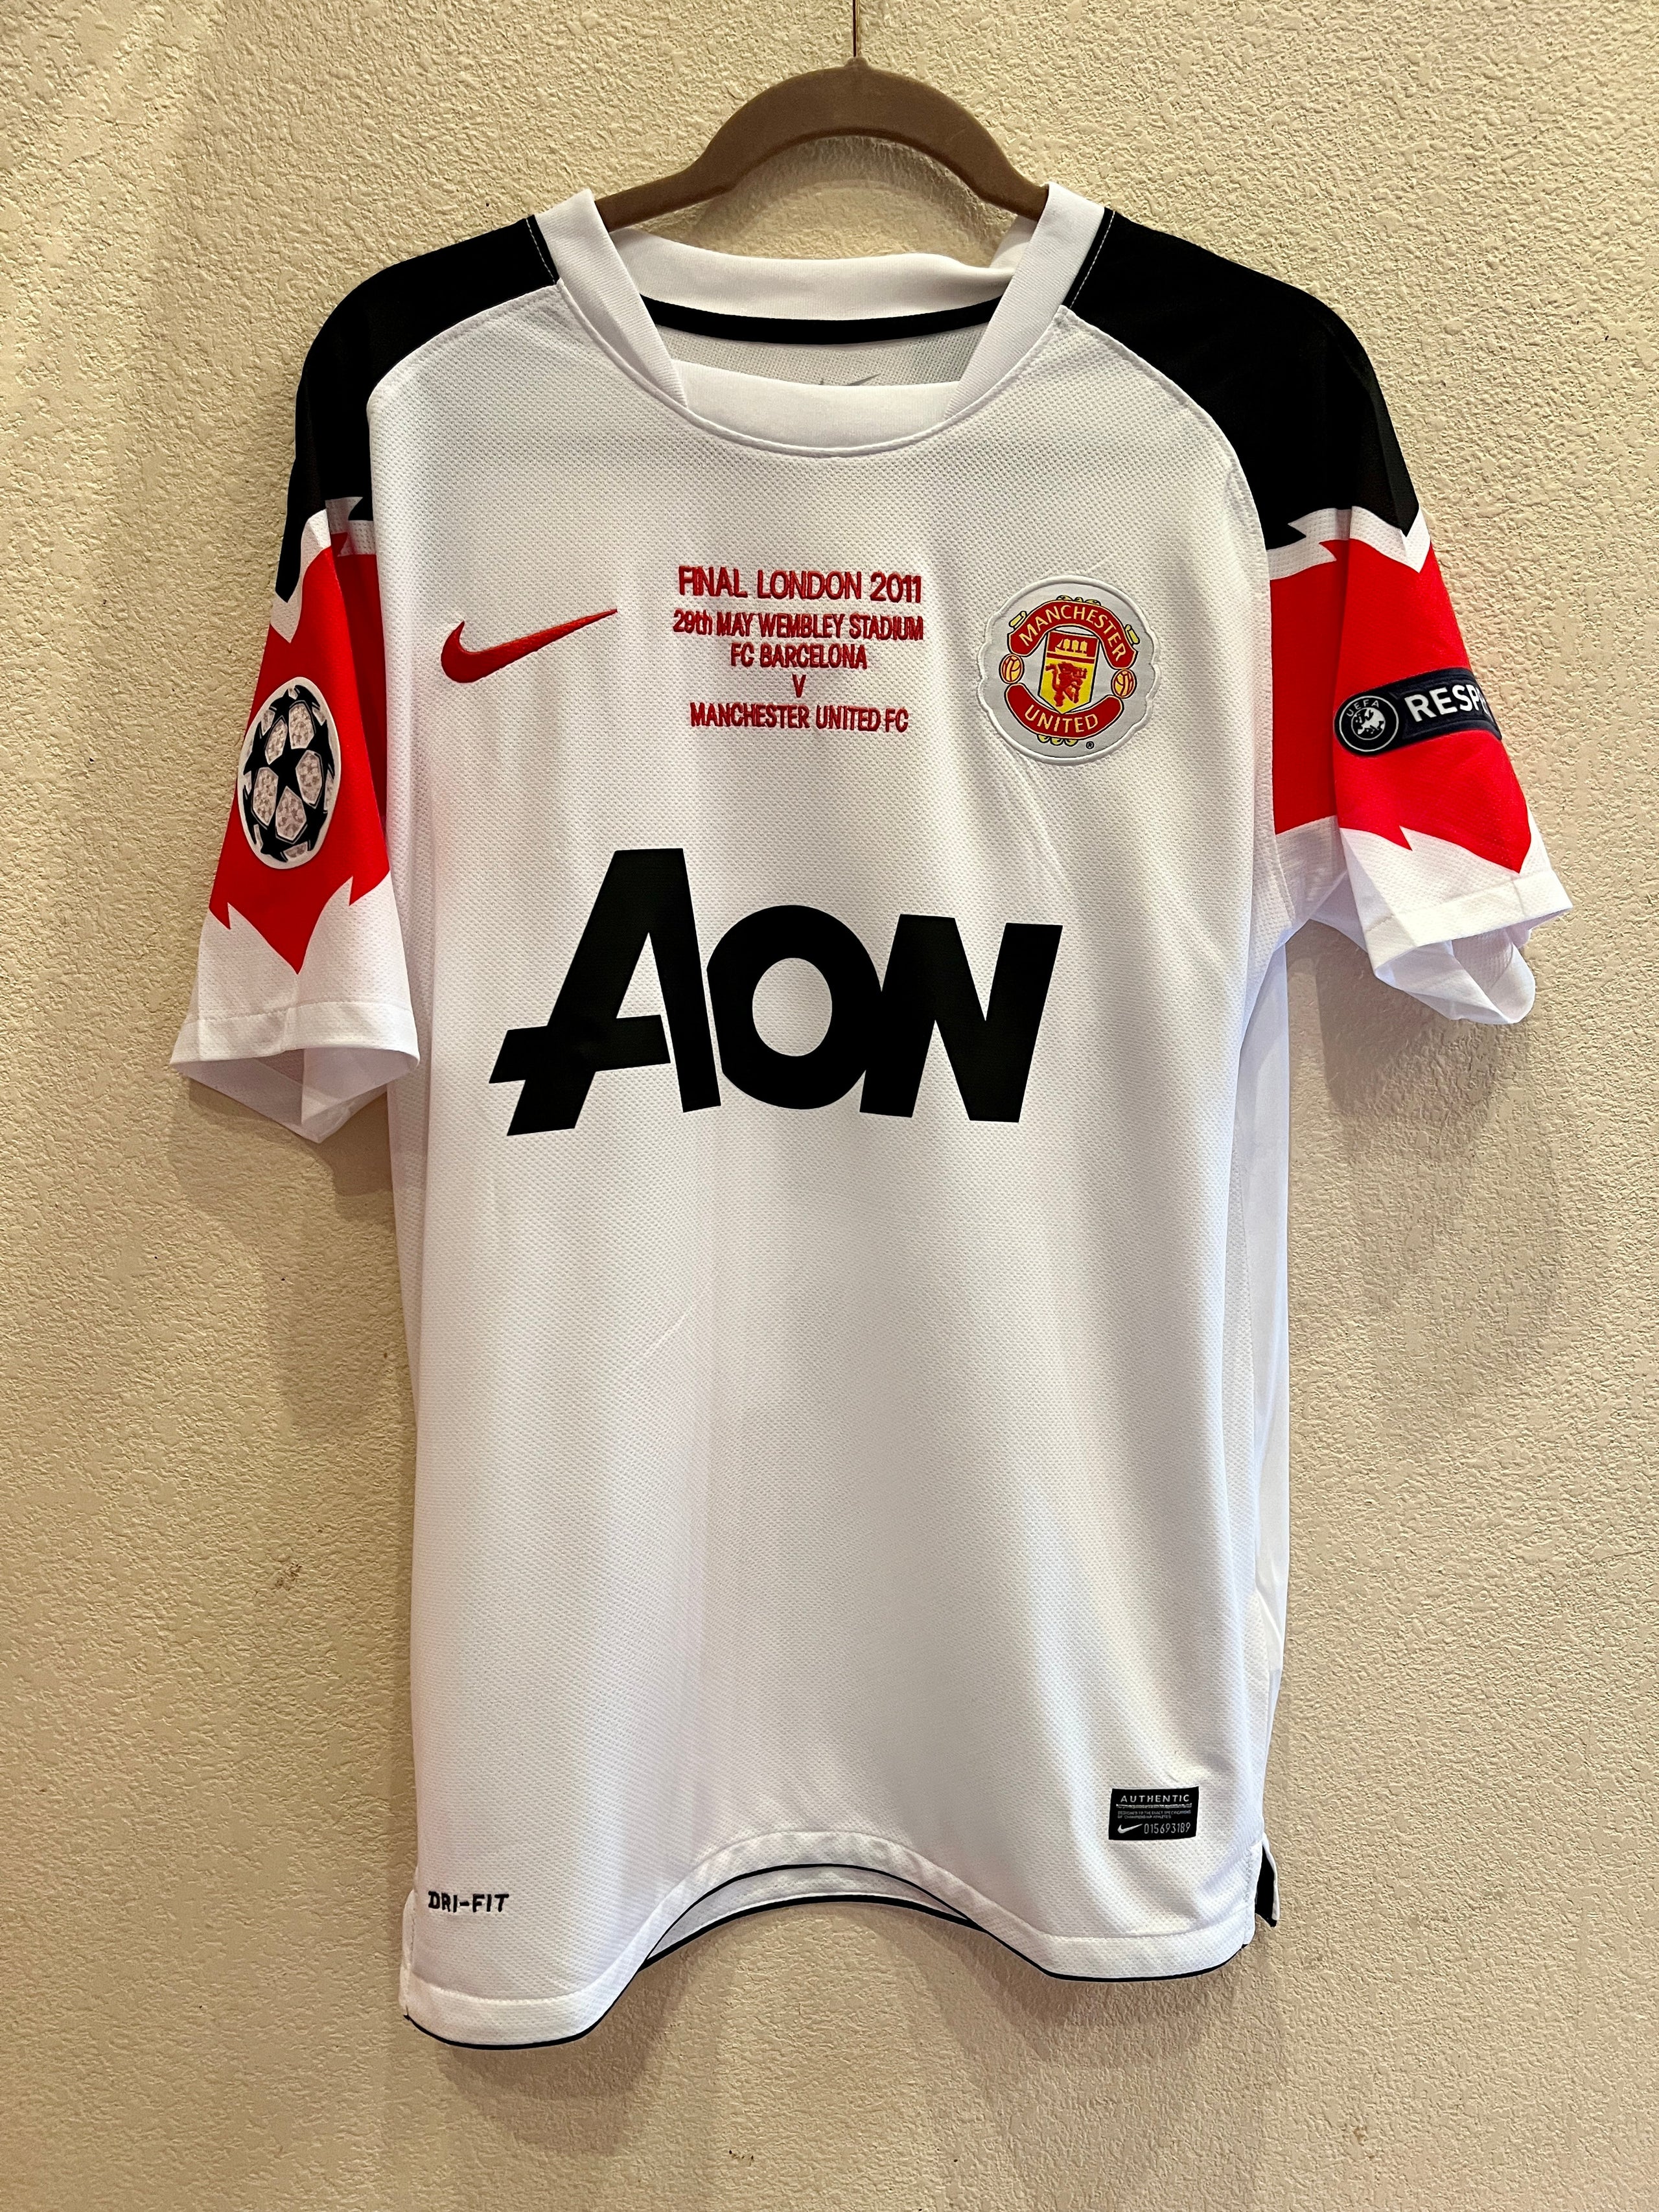 Manchester United 2011 Chicharito UCL final jersey